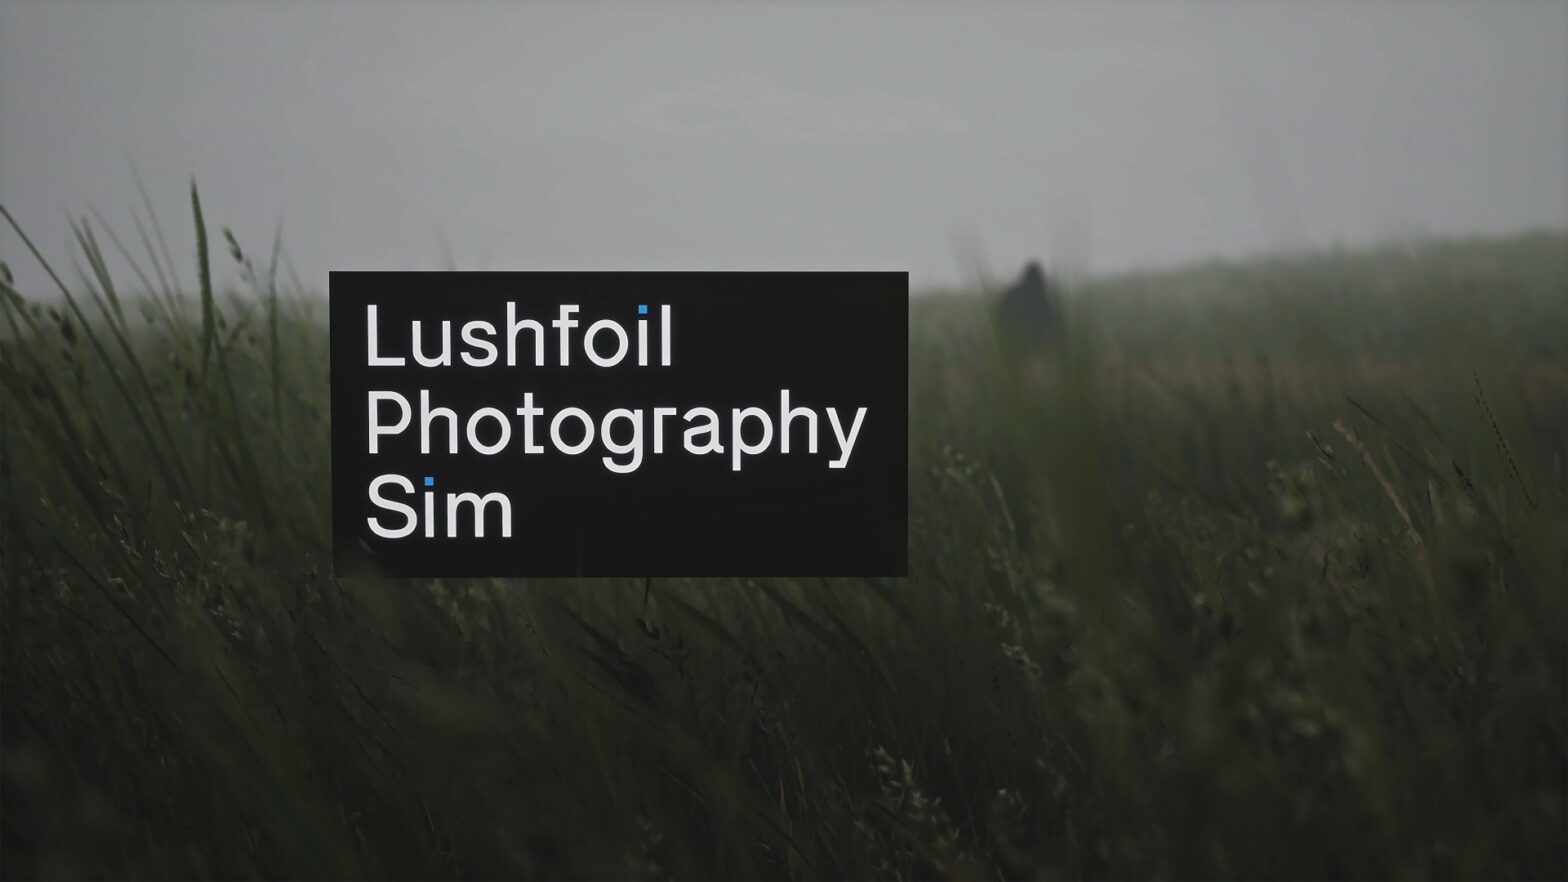 Lushfoil Photography Sim has you explore nature to snap the most beautiful photos